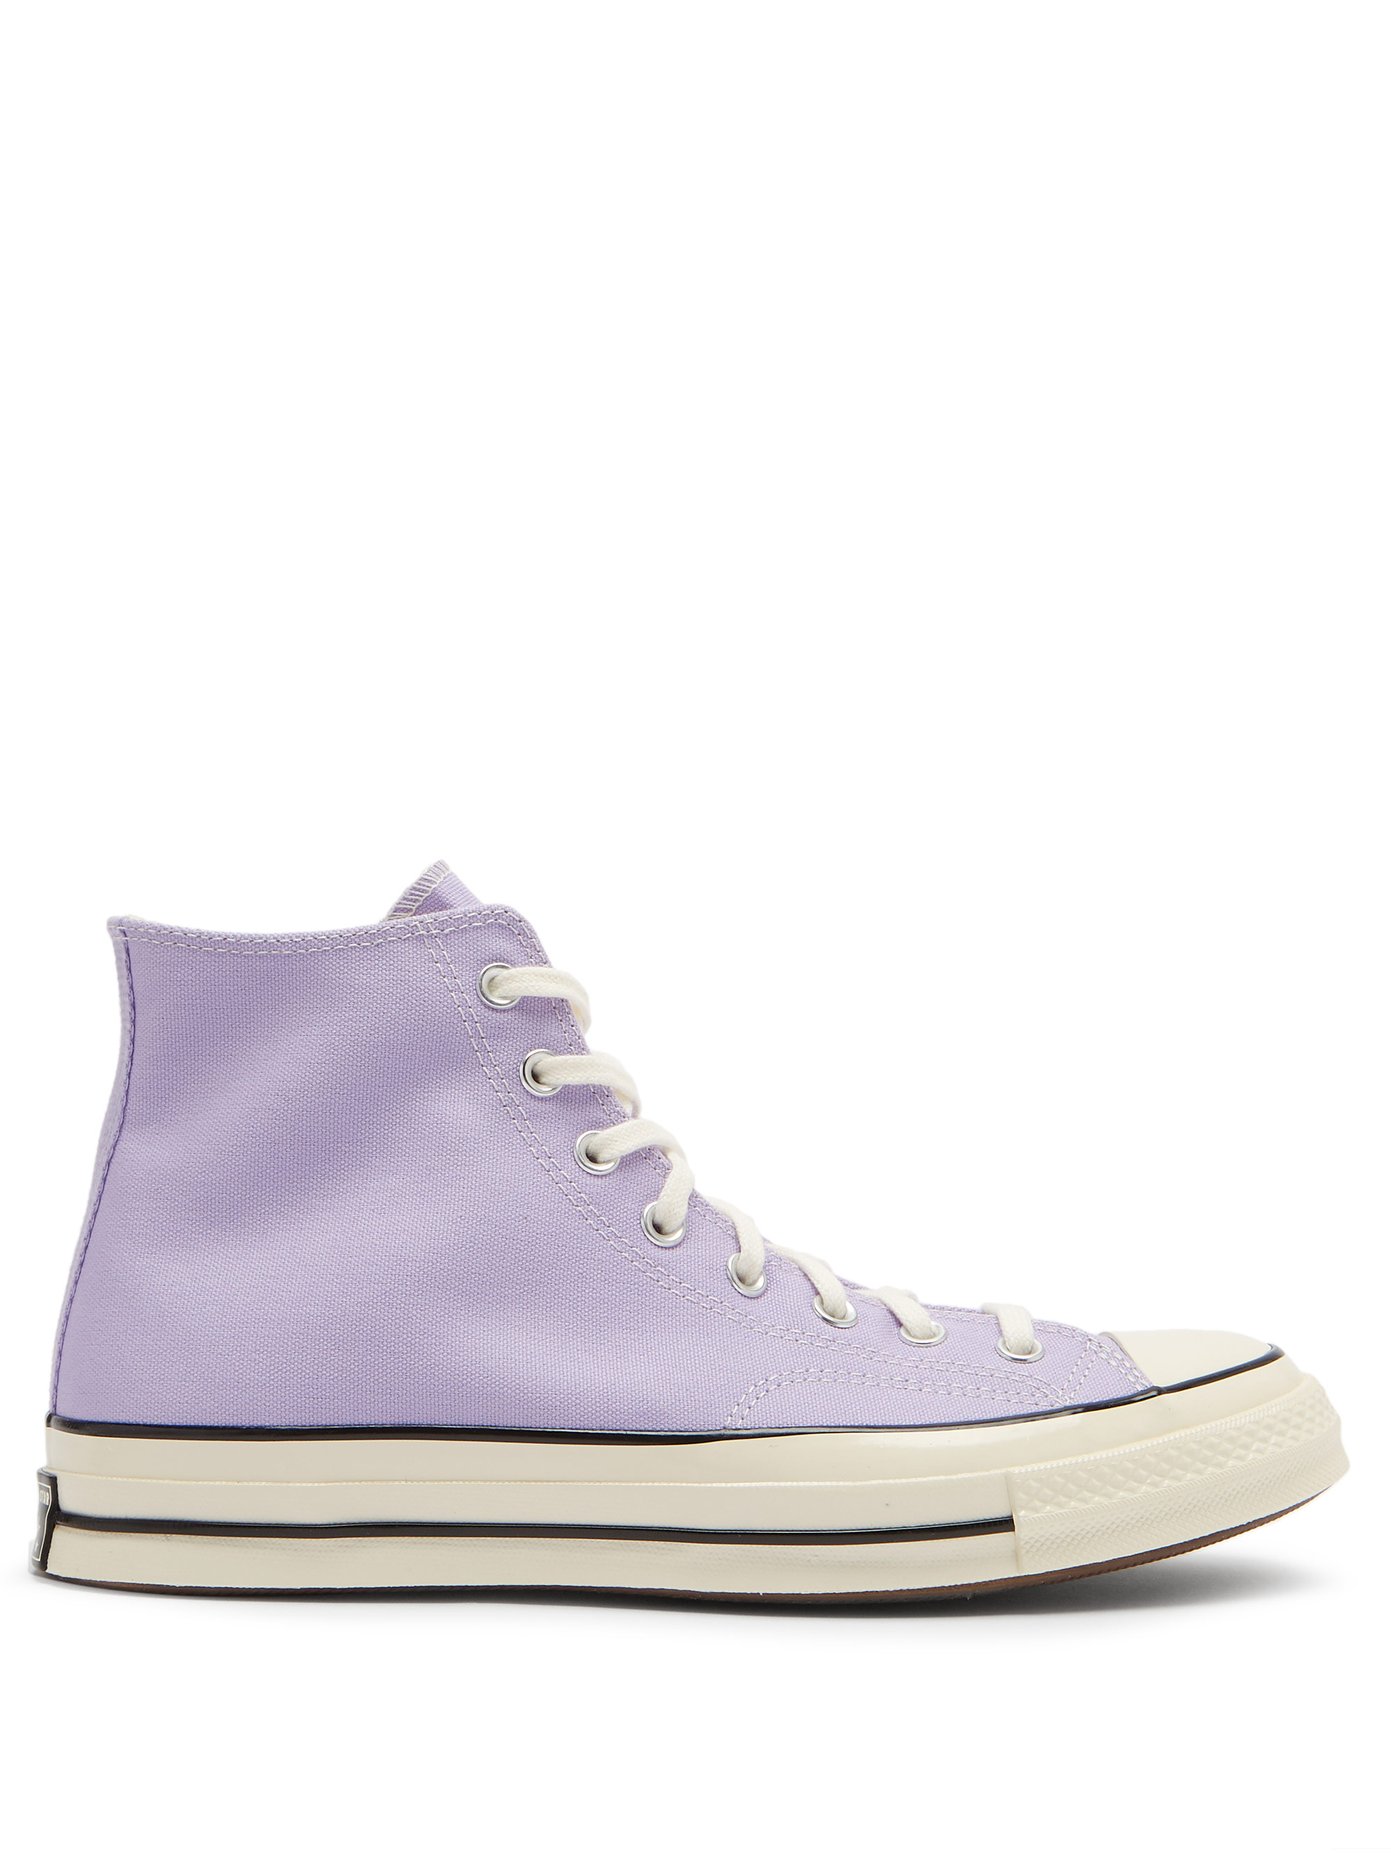 deals on converse trainers